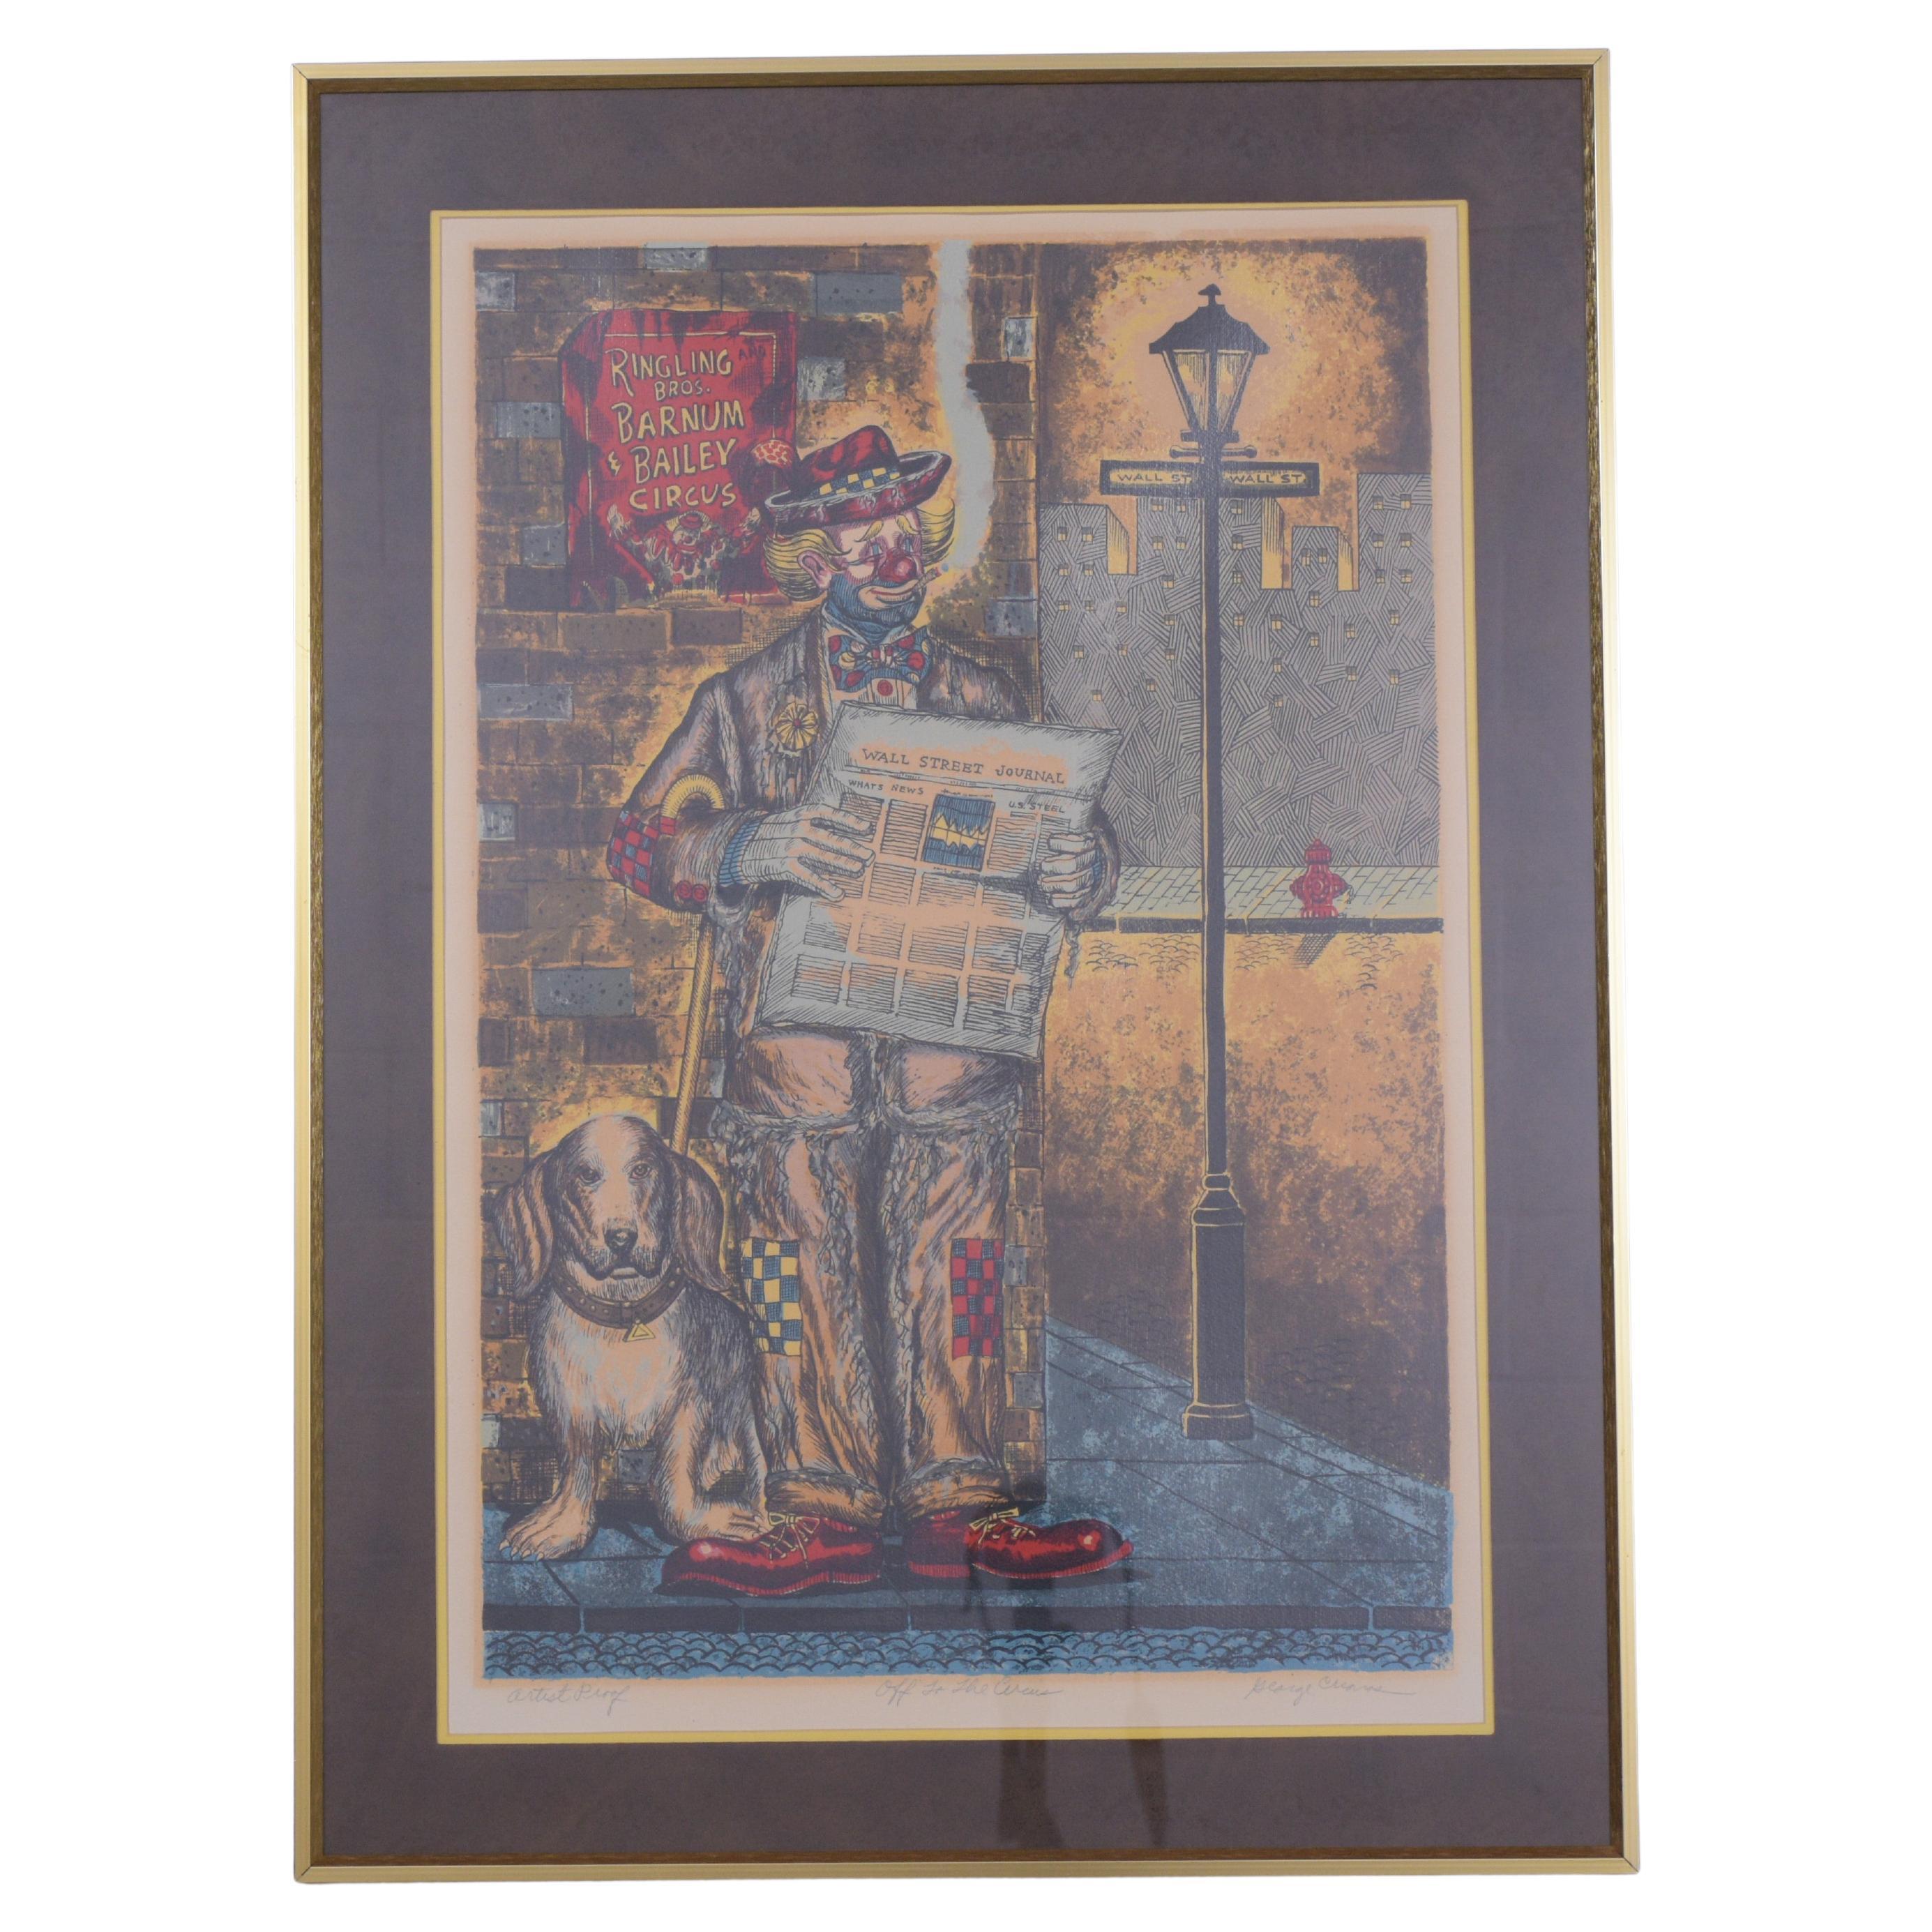 George Crionas' "Off to the Circus" Lithograph